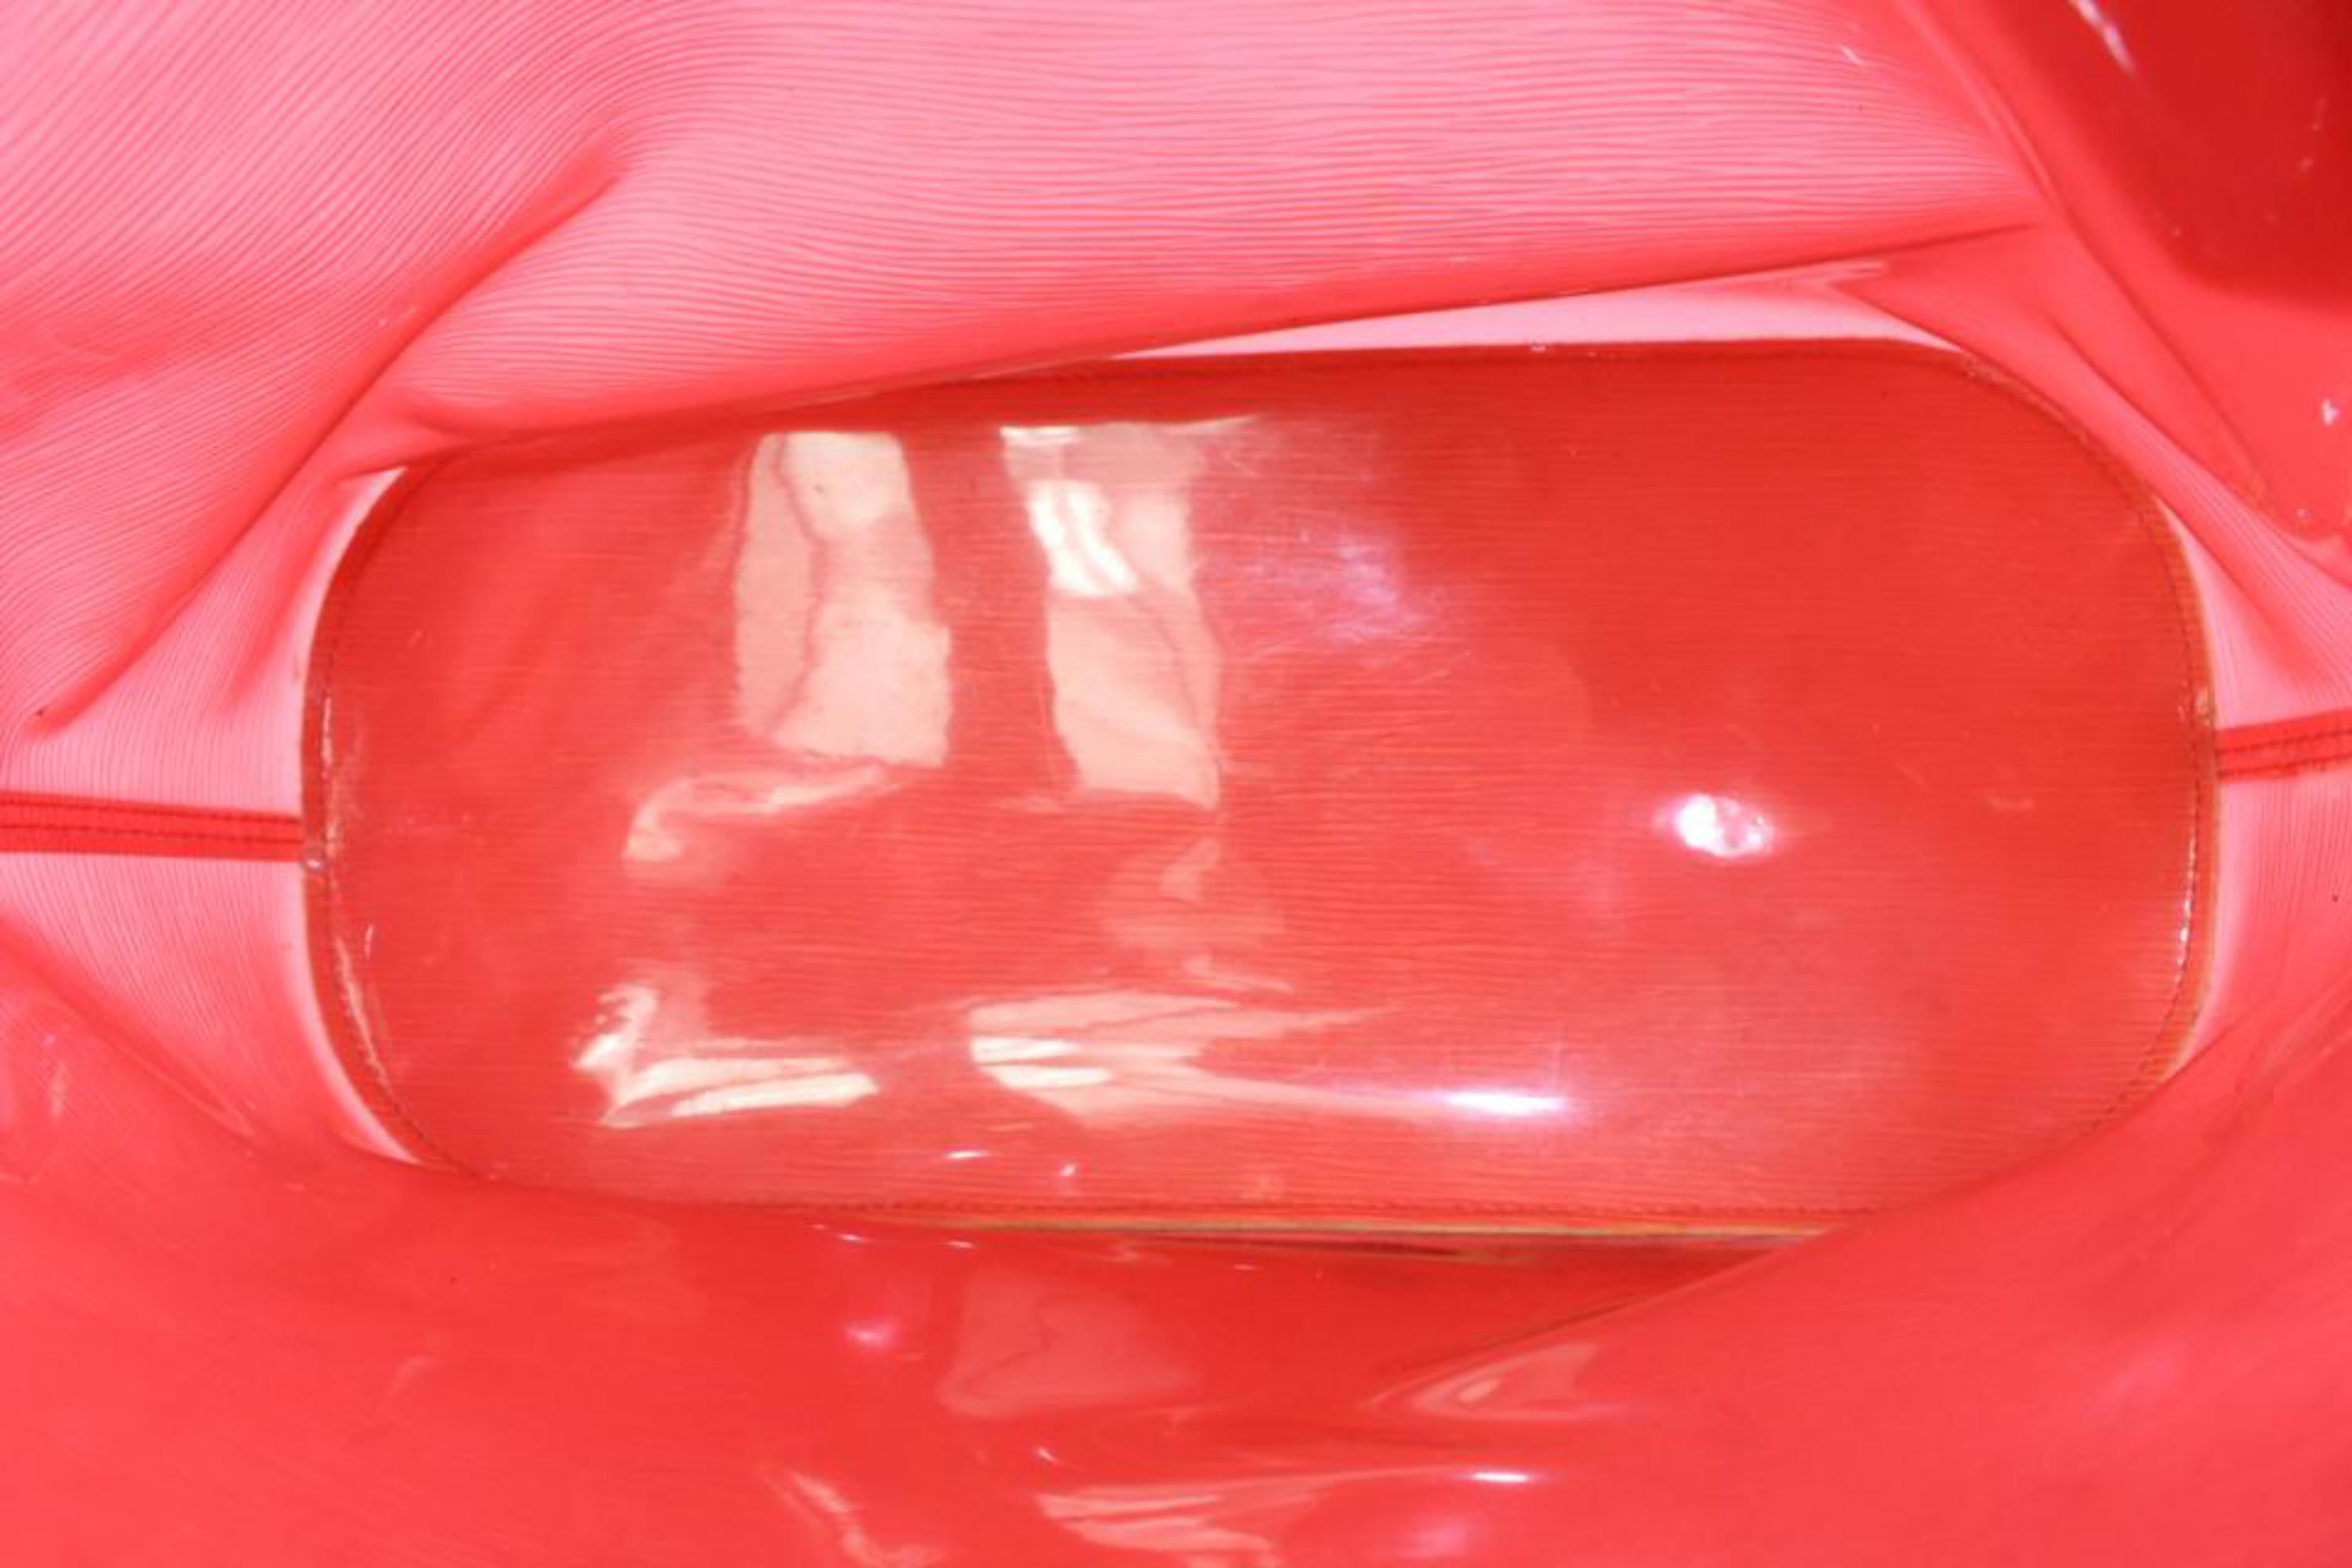 Louis Vuitton Translucent Red Epi Plage Lagoon Bay MM Clear Tote Bag 101lv27 3